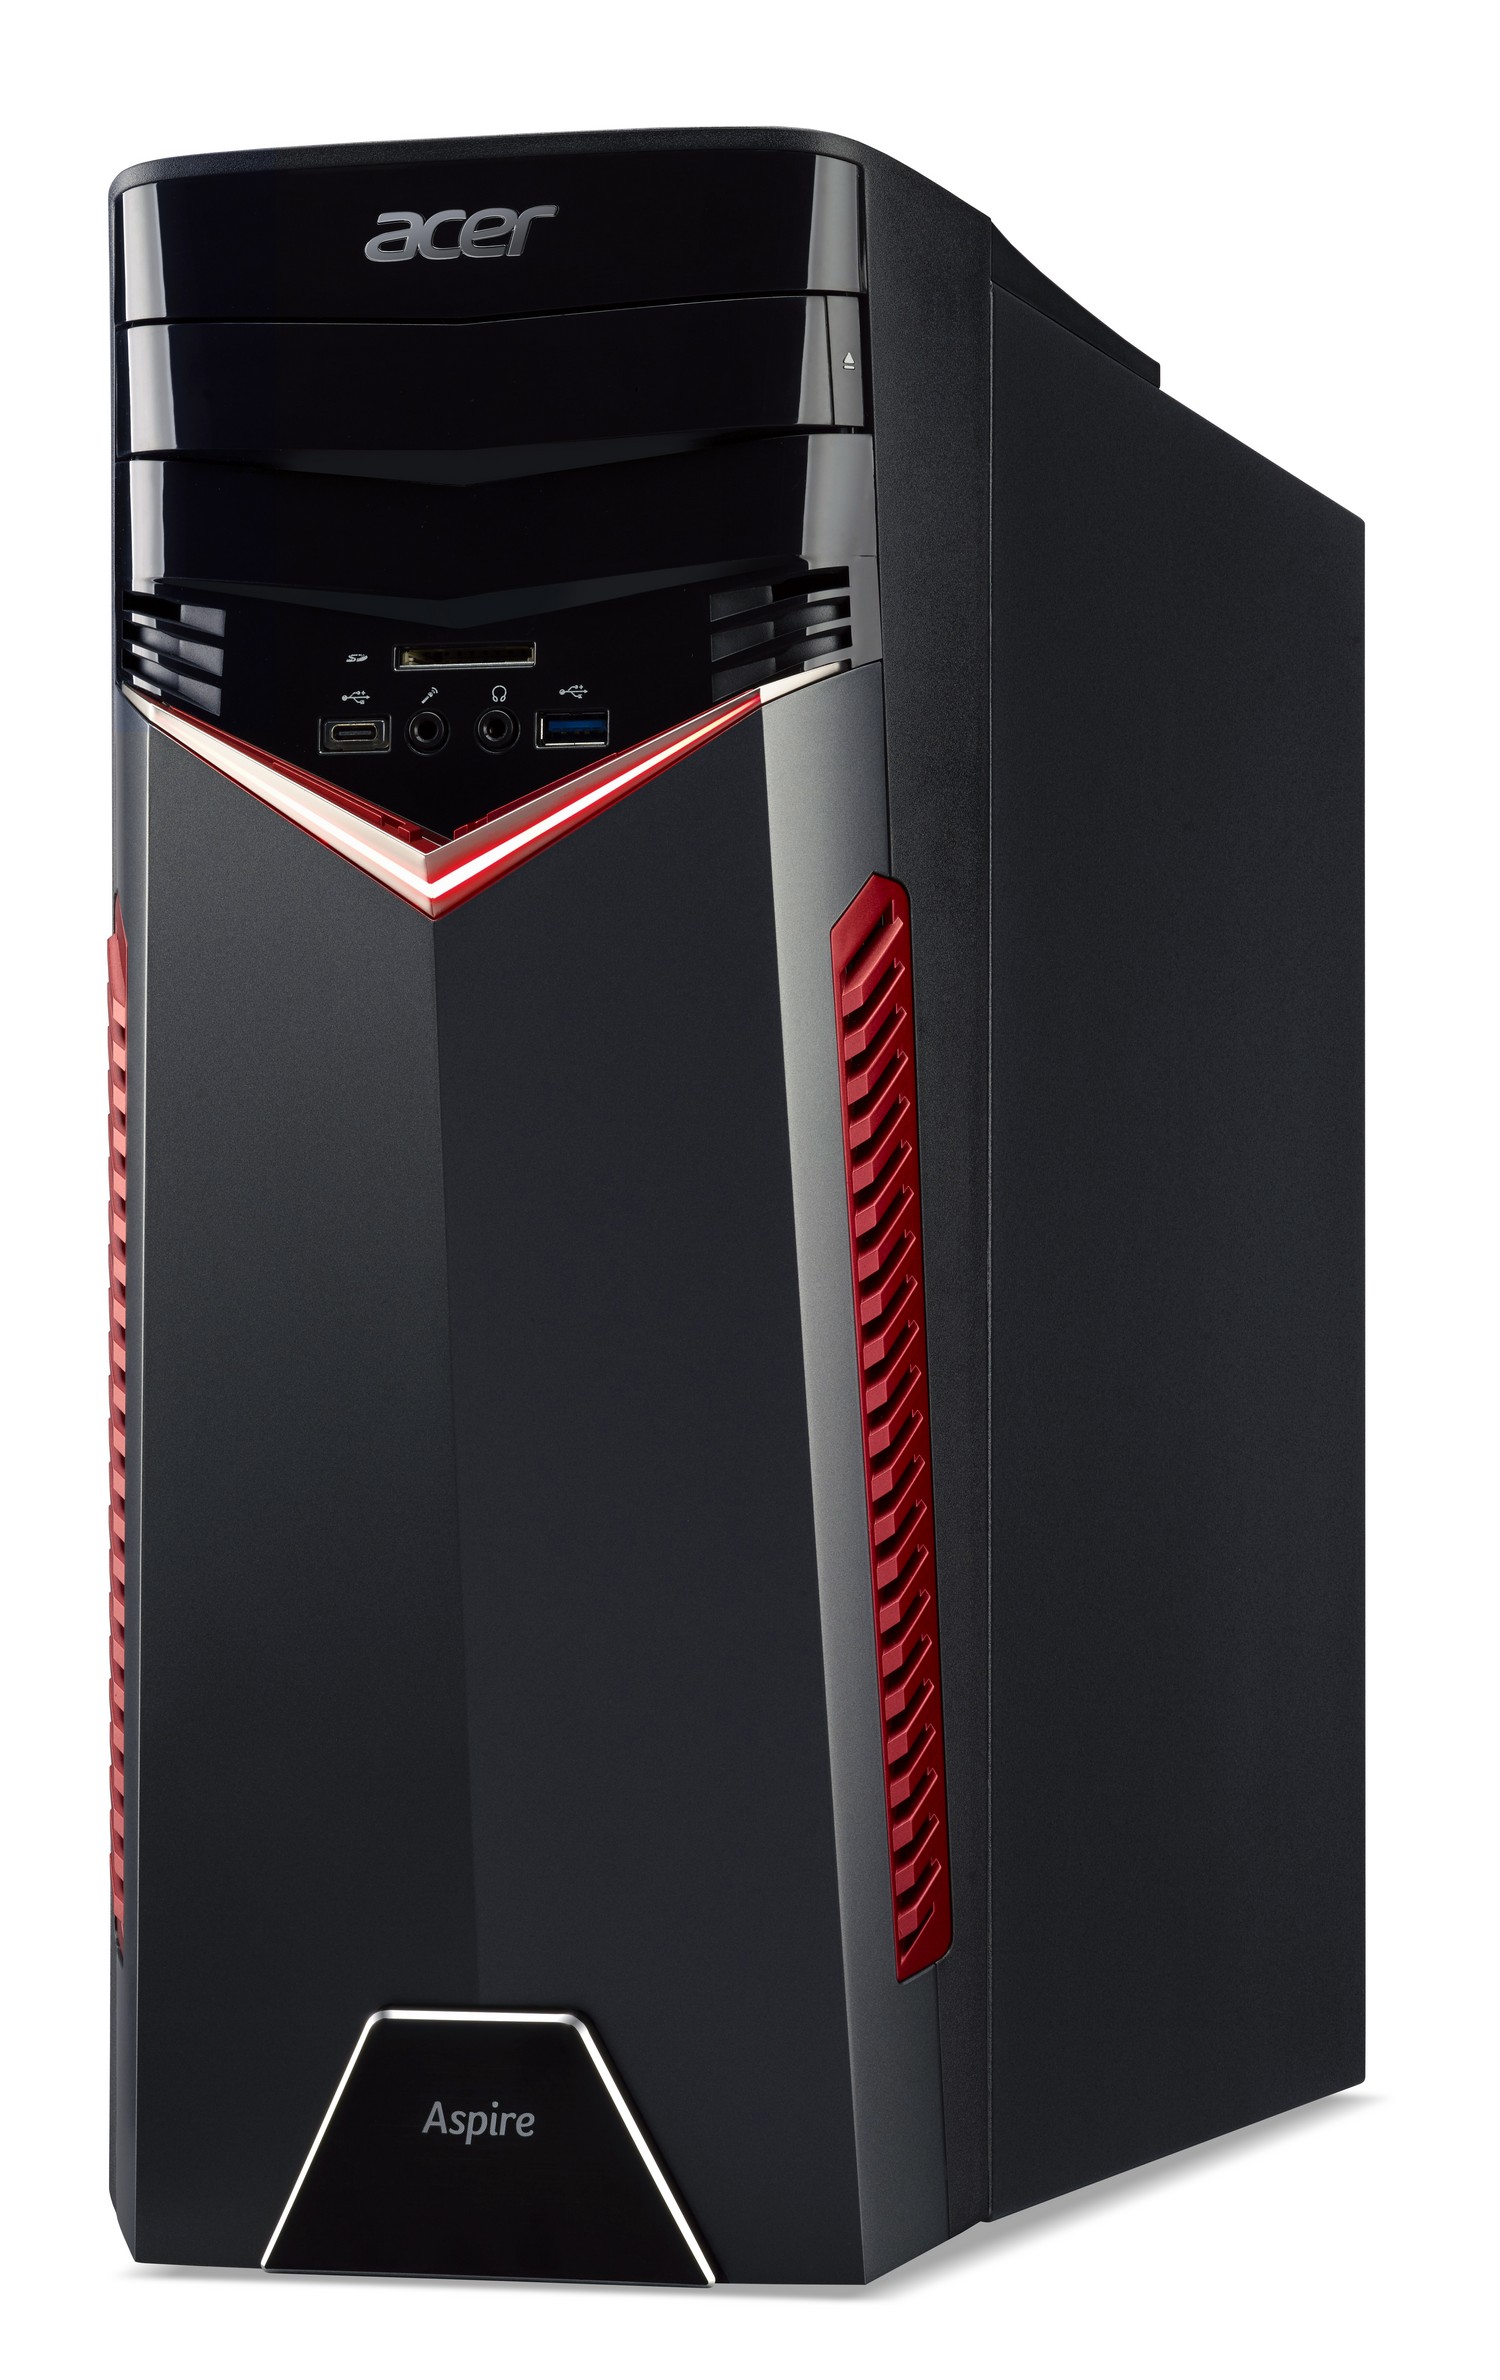 Acer Announces The Gx Series Gaming Desktops